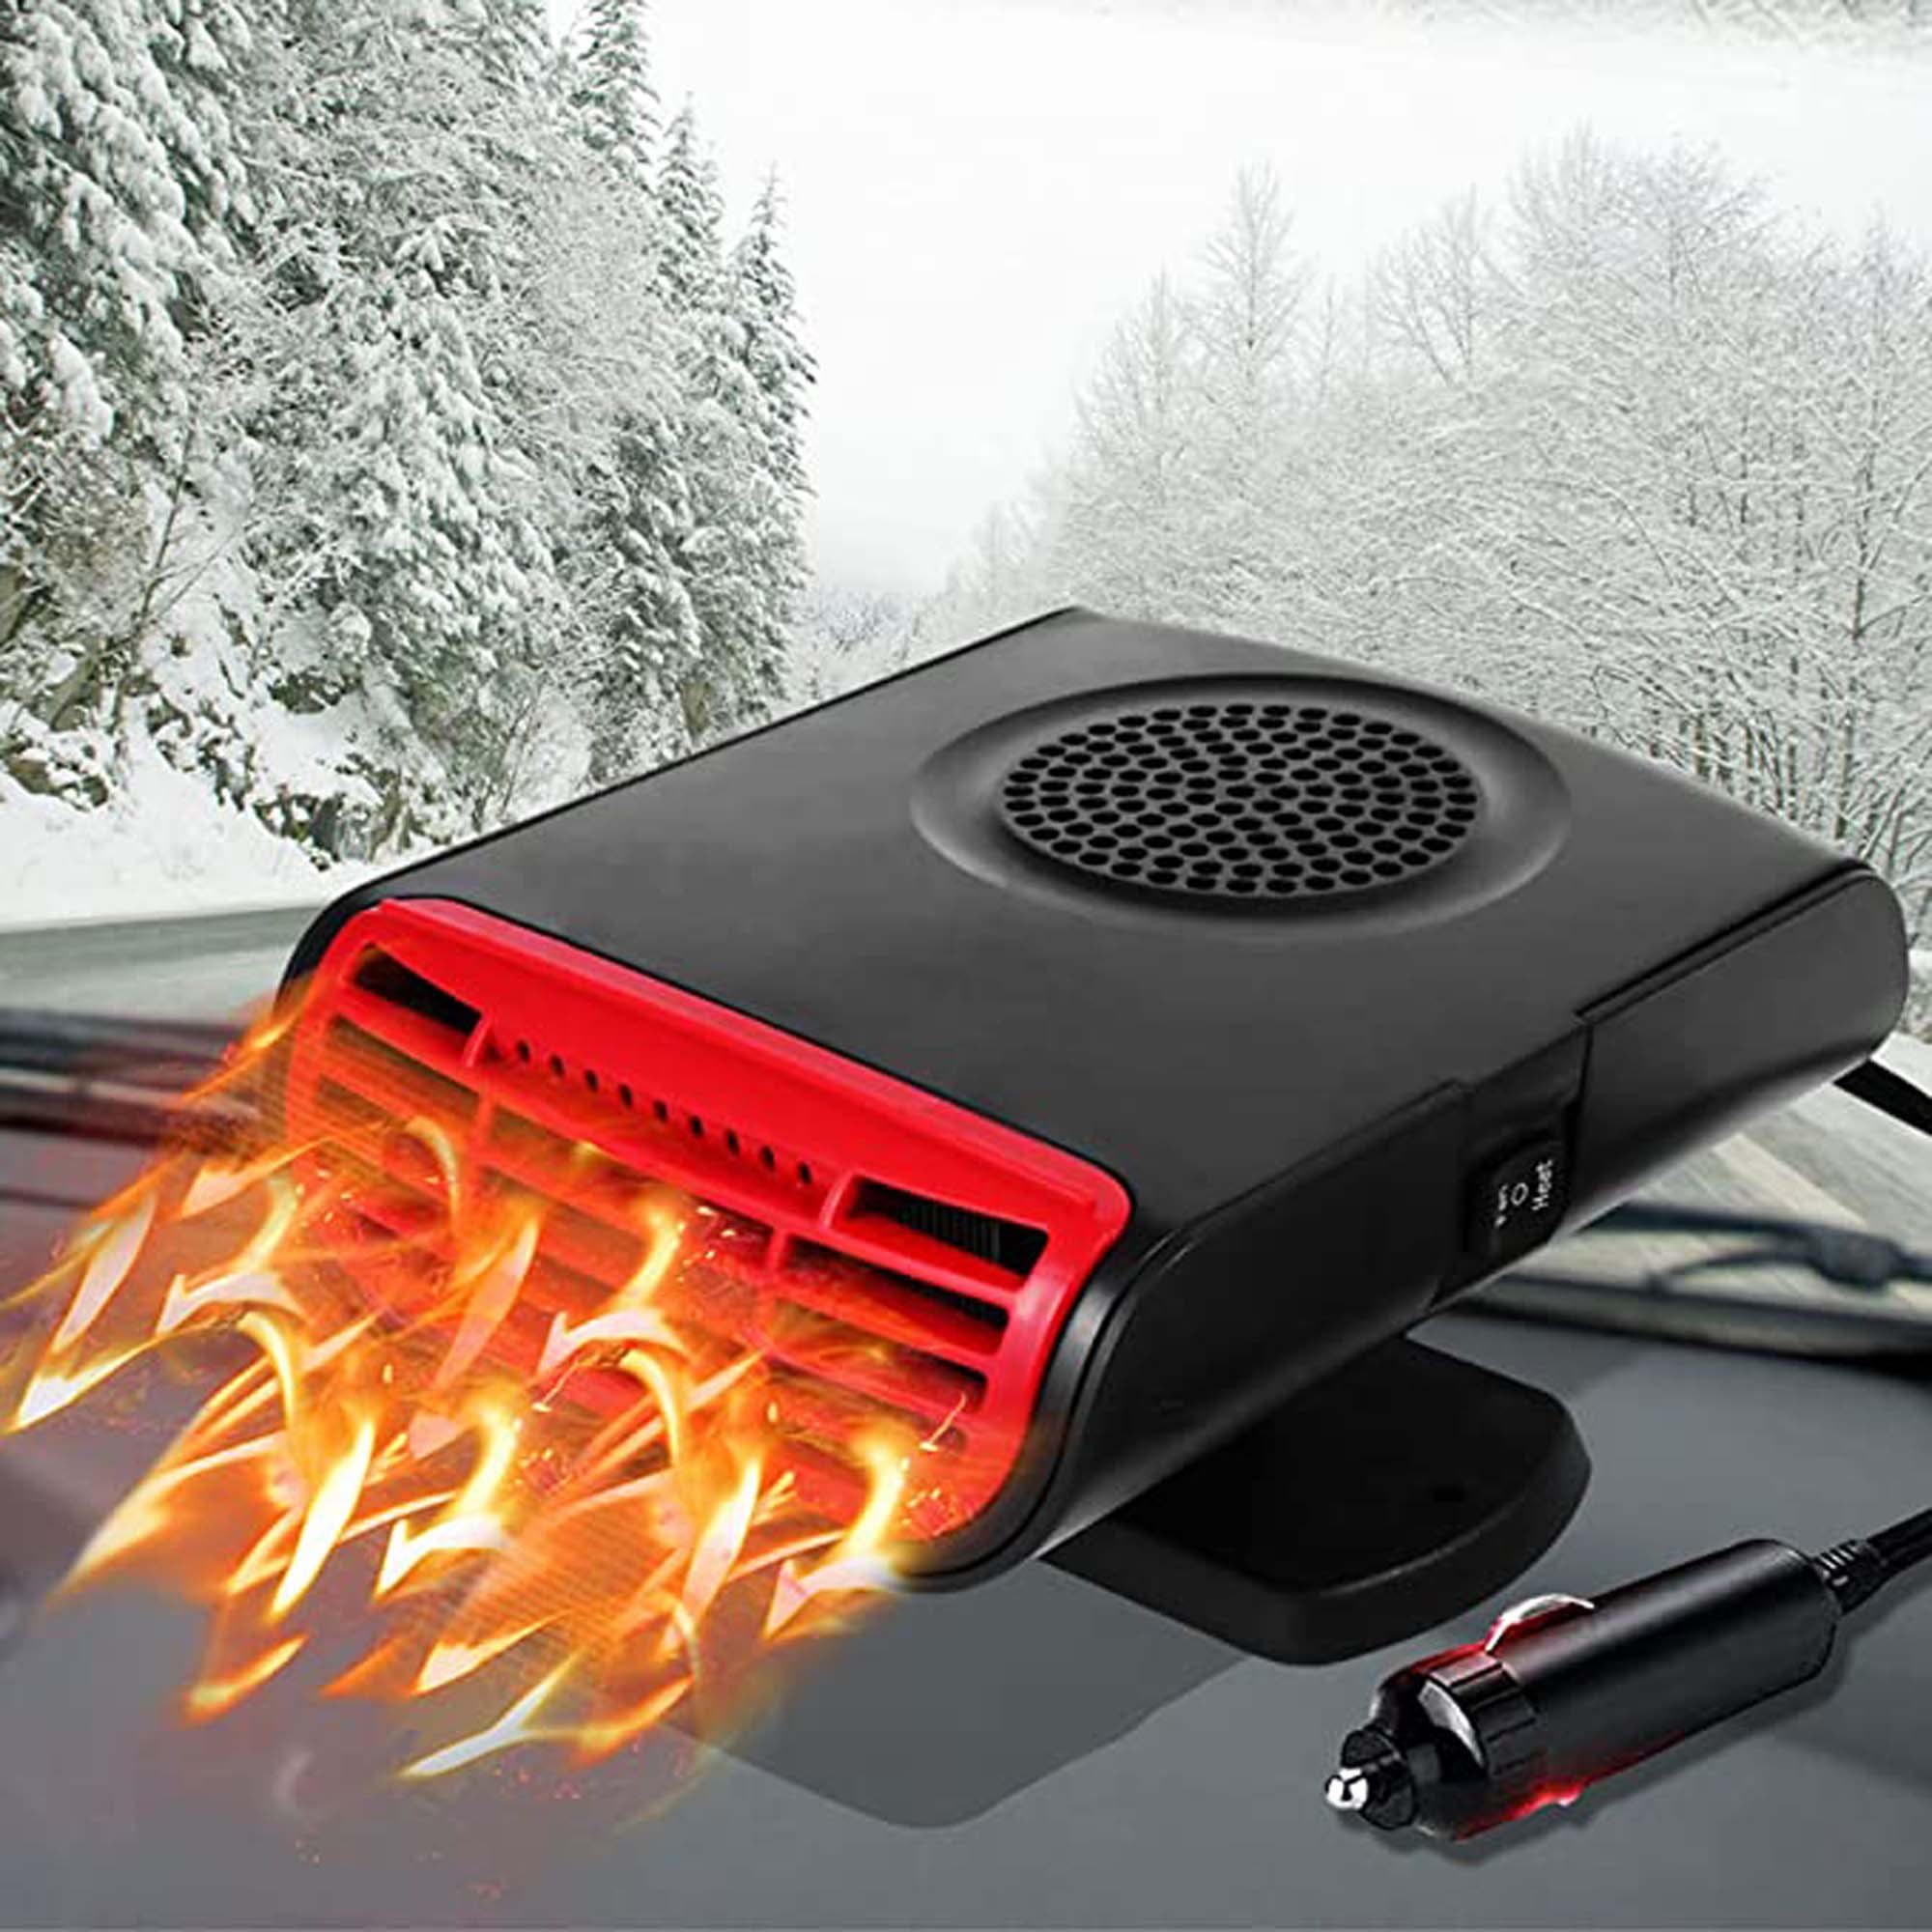 Car Heater, 12V Portable Car Heater, 12 Volt Portable Car Heater and  Defroster That Plugs into Cigarette Lighter, Window Defroster for Car,  Pickup